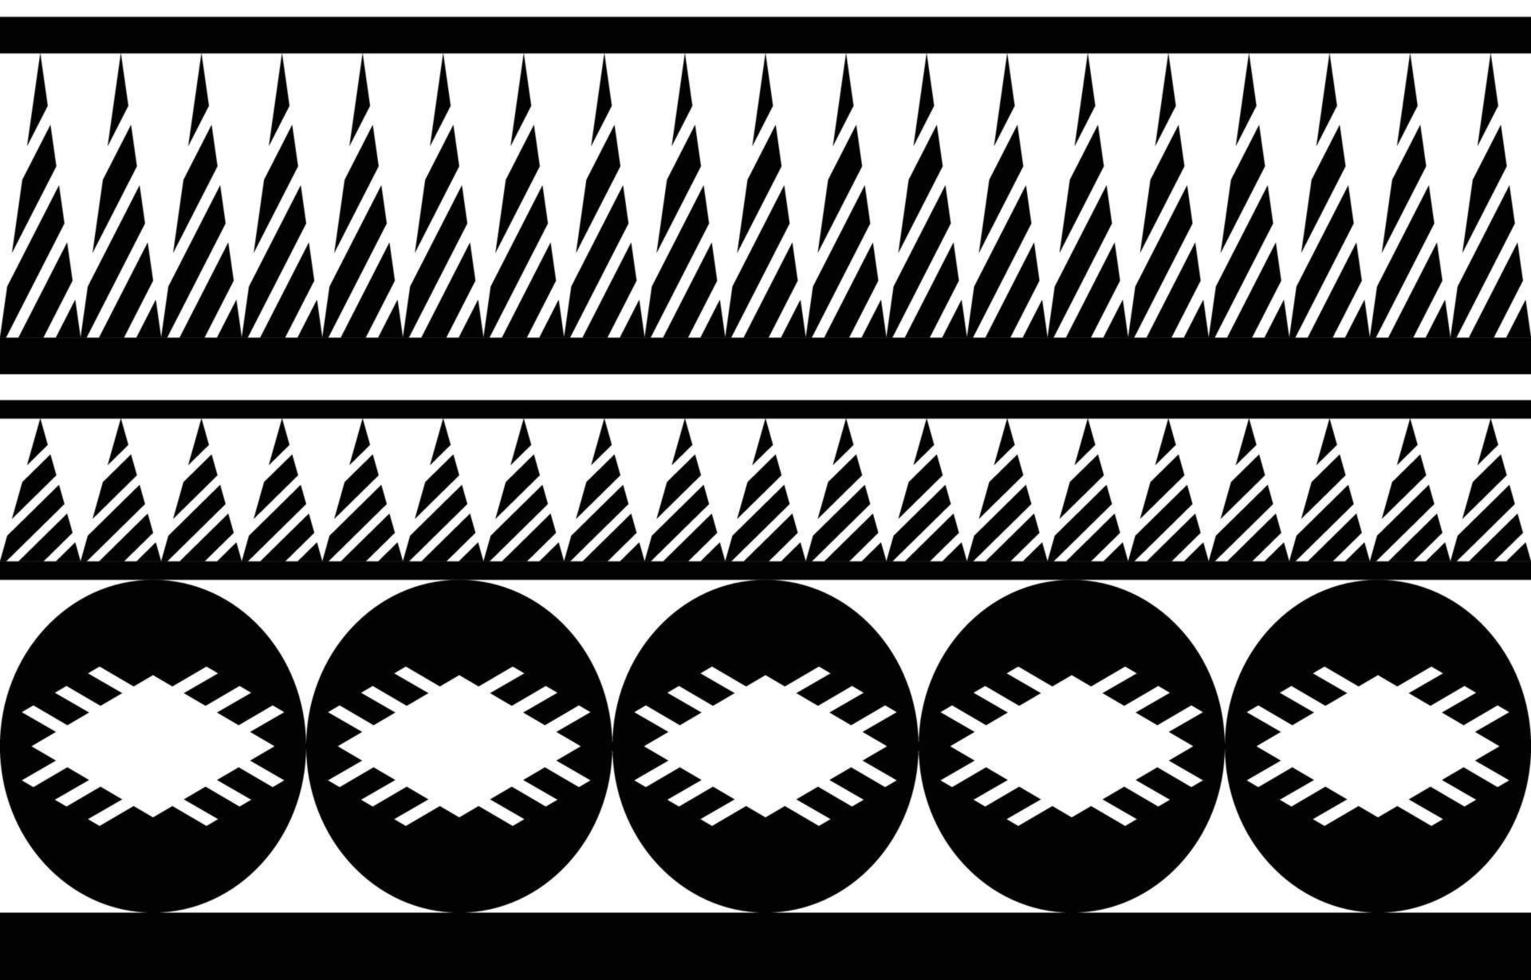 tribal Black and white Abstract ethnic geometric pattern design for background or wallpaper. fabric pattern vector illustration,carpet,mat,wallpaper,clothing,wrapping,Batik